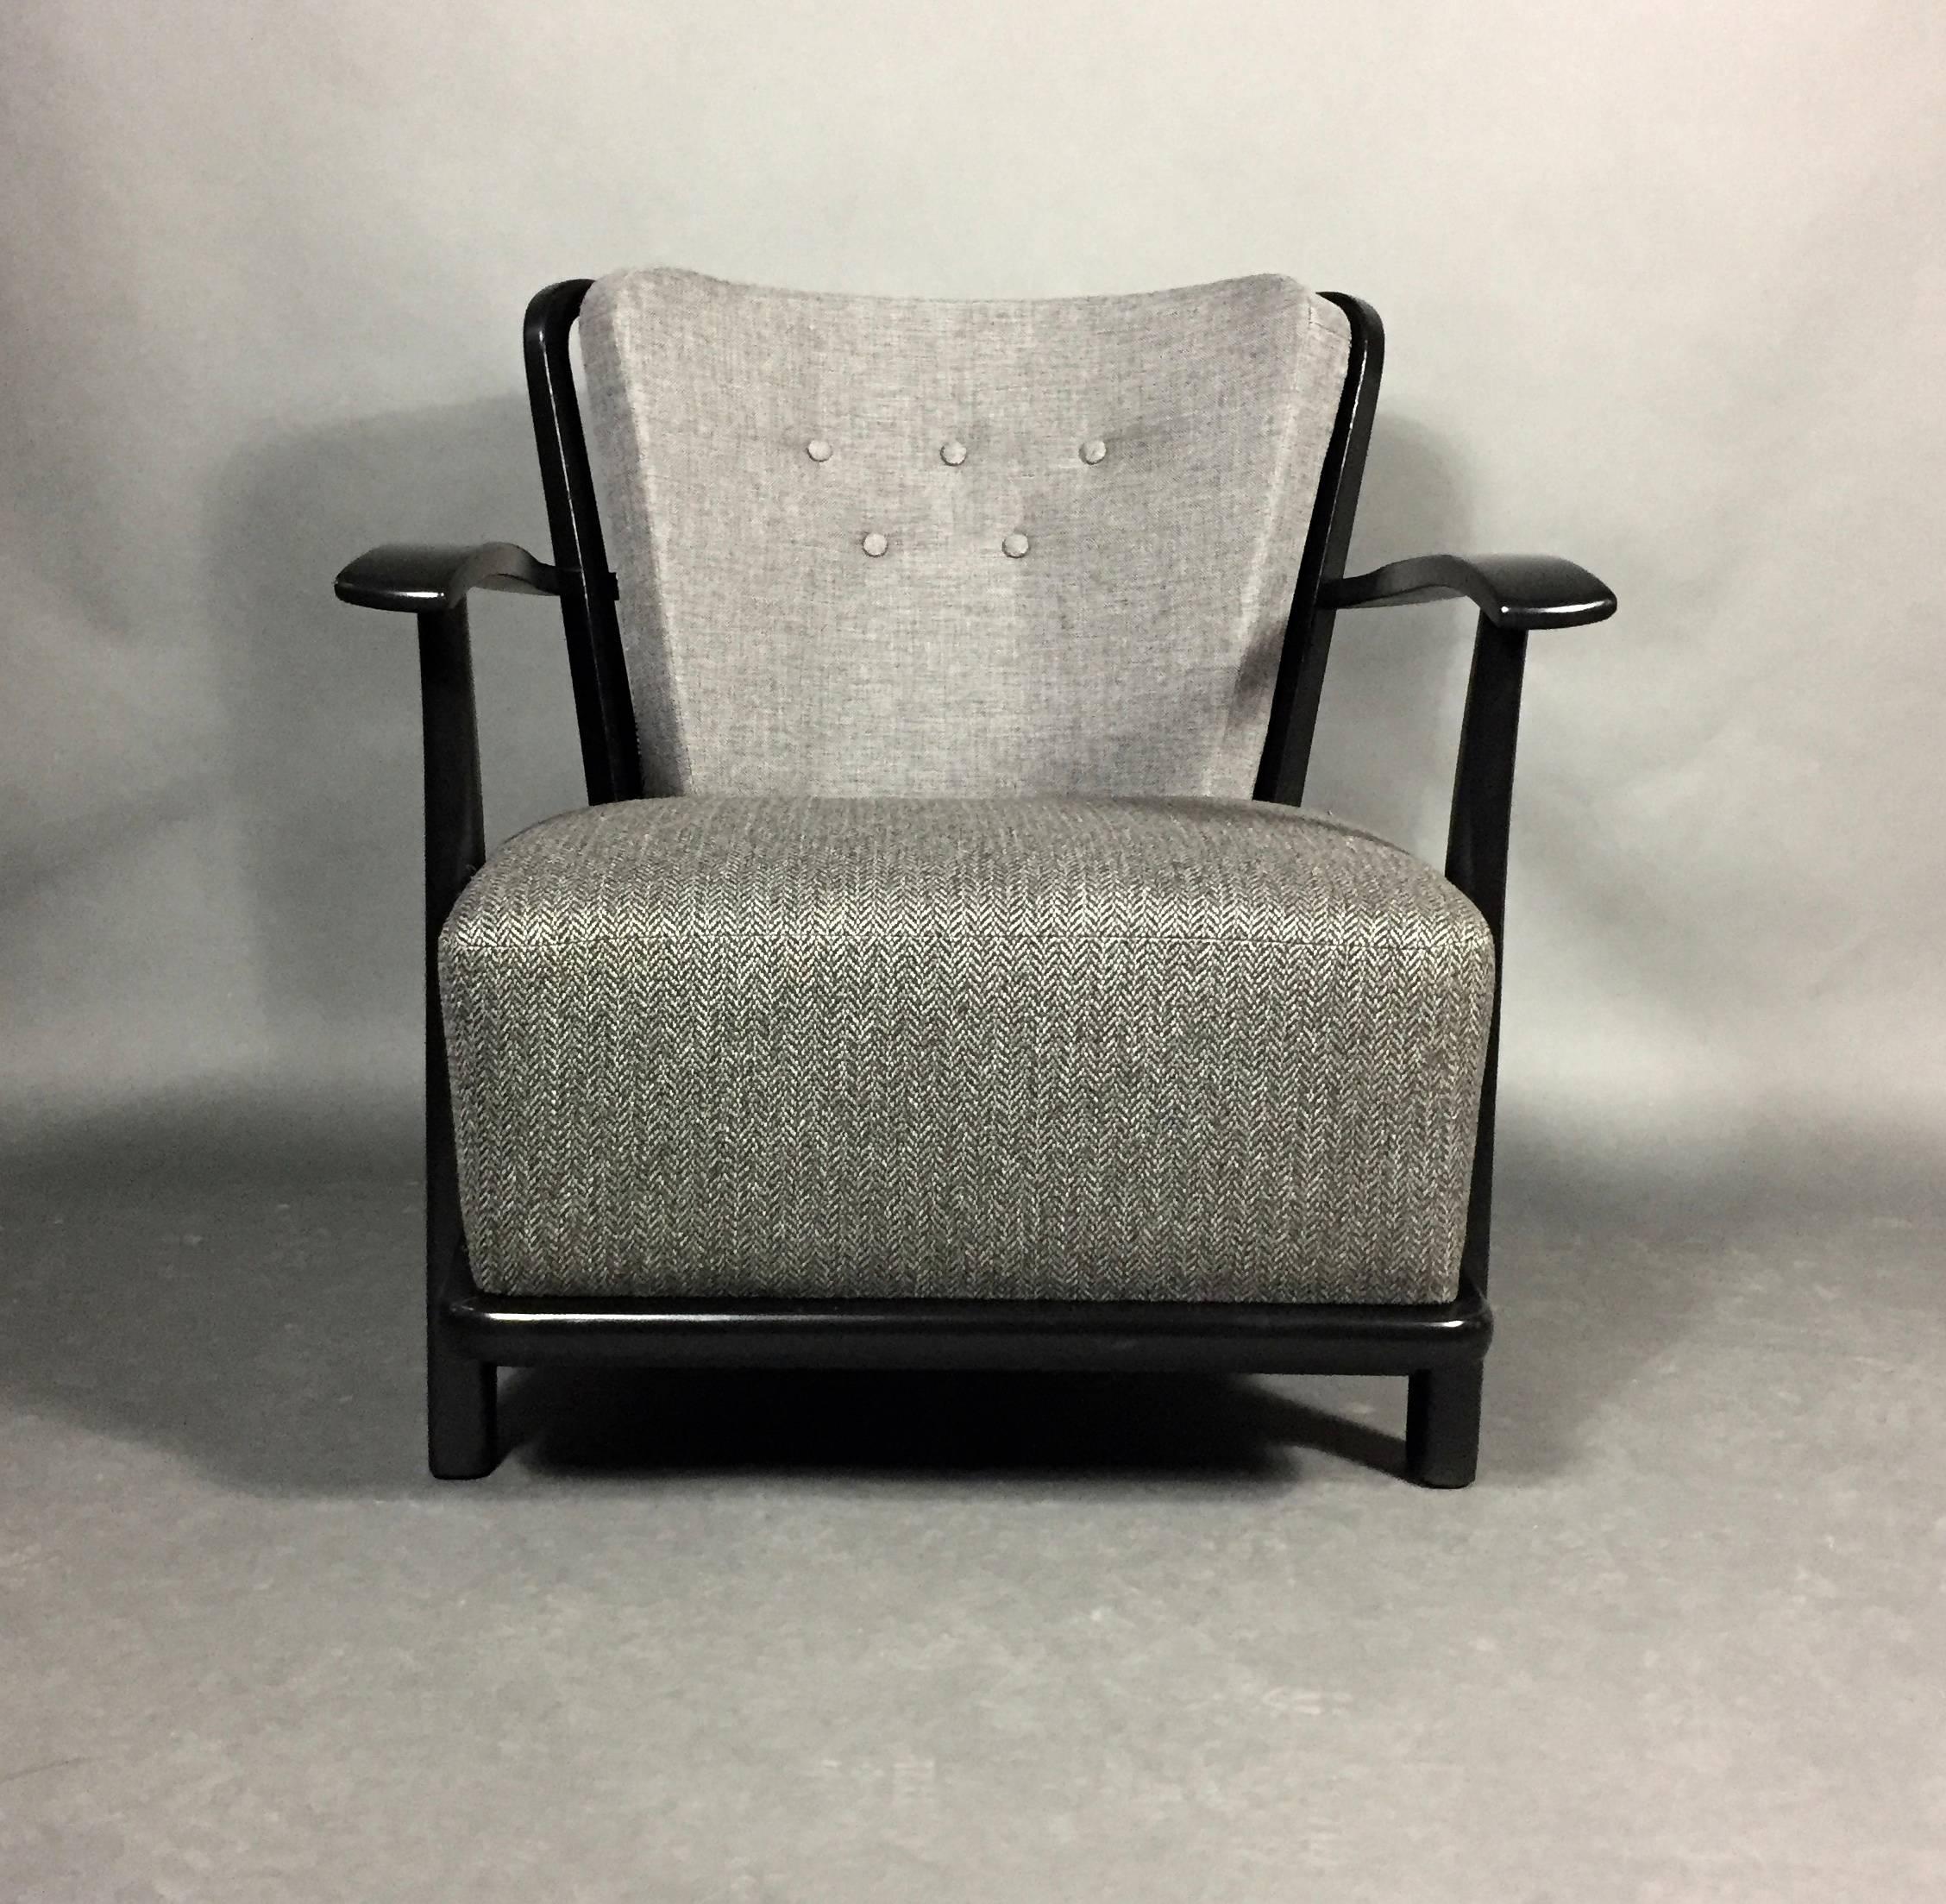 A unique lightness of touch in design makes this chair beautiful from all sides. The deep spring'd seat is complimented by an artfully curved and spindle back. Original birch frame recently updated in black lacquer and contrasting gray buttoned back